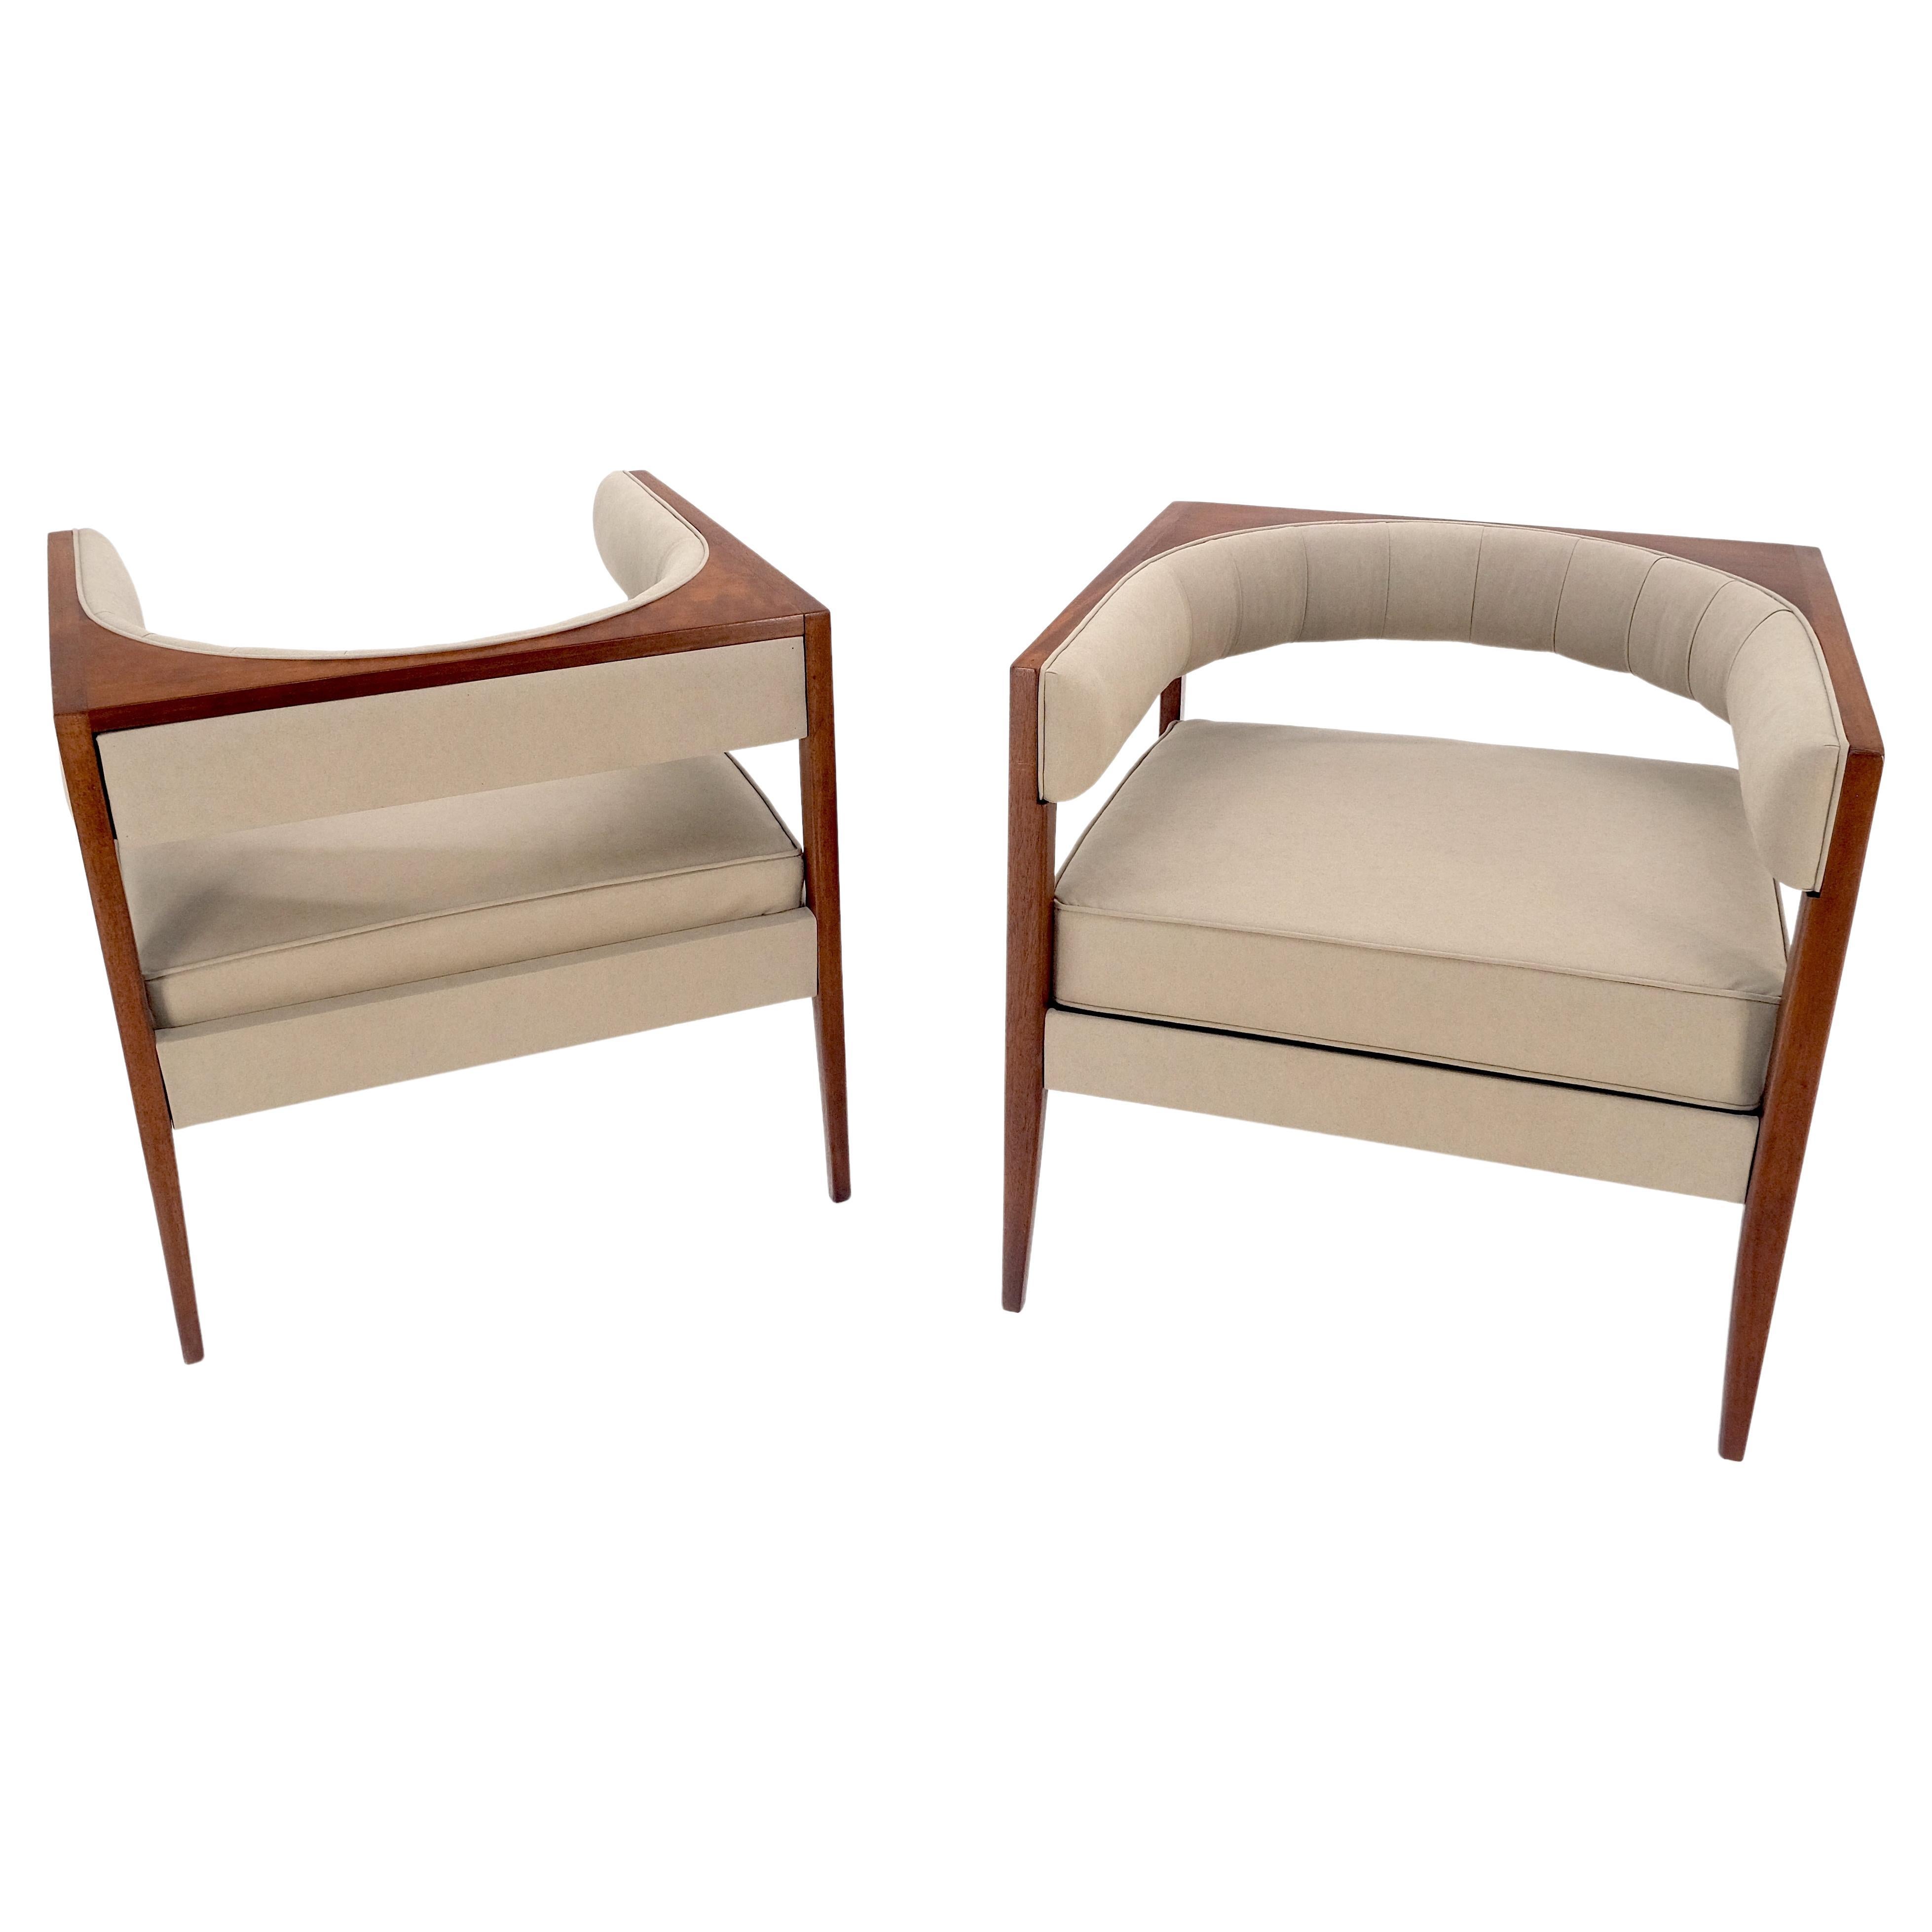 Pair New Alcantera Upholstery Oiled Walnut Cube Shape Barrel Wrap Around Back Lounge Chairs MINT!